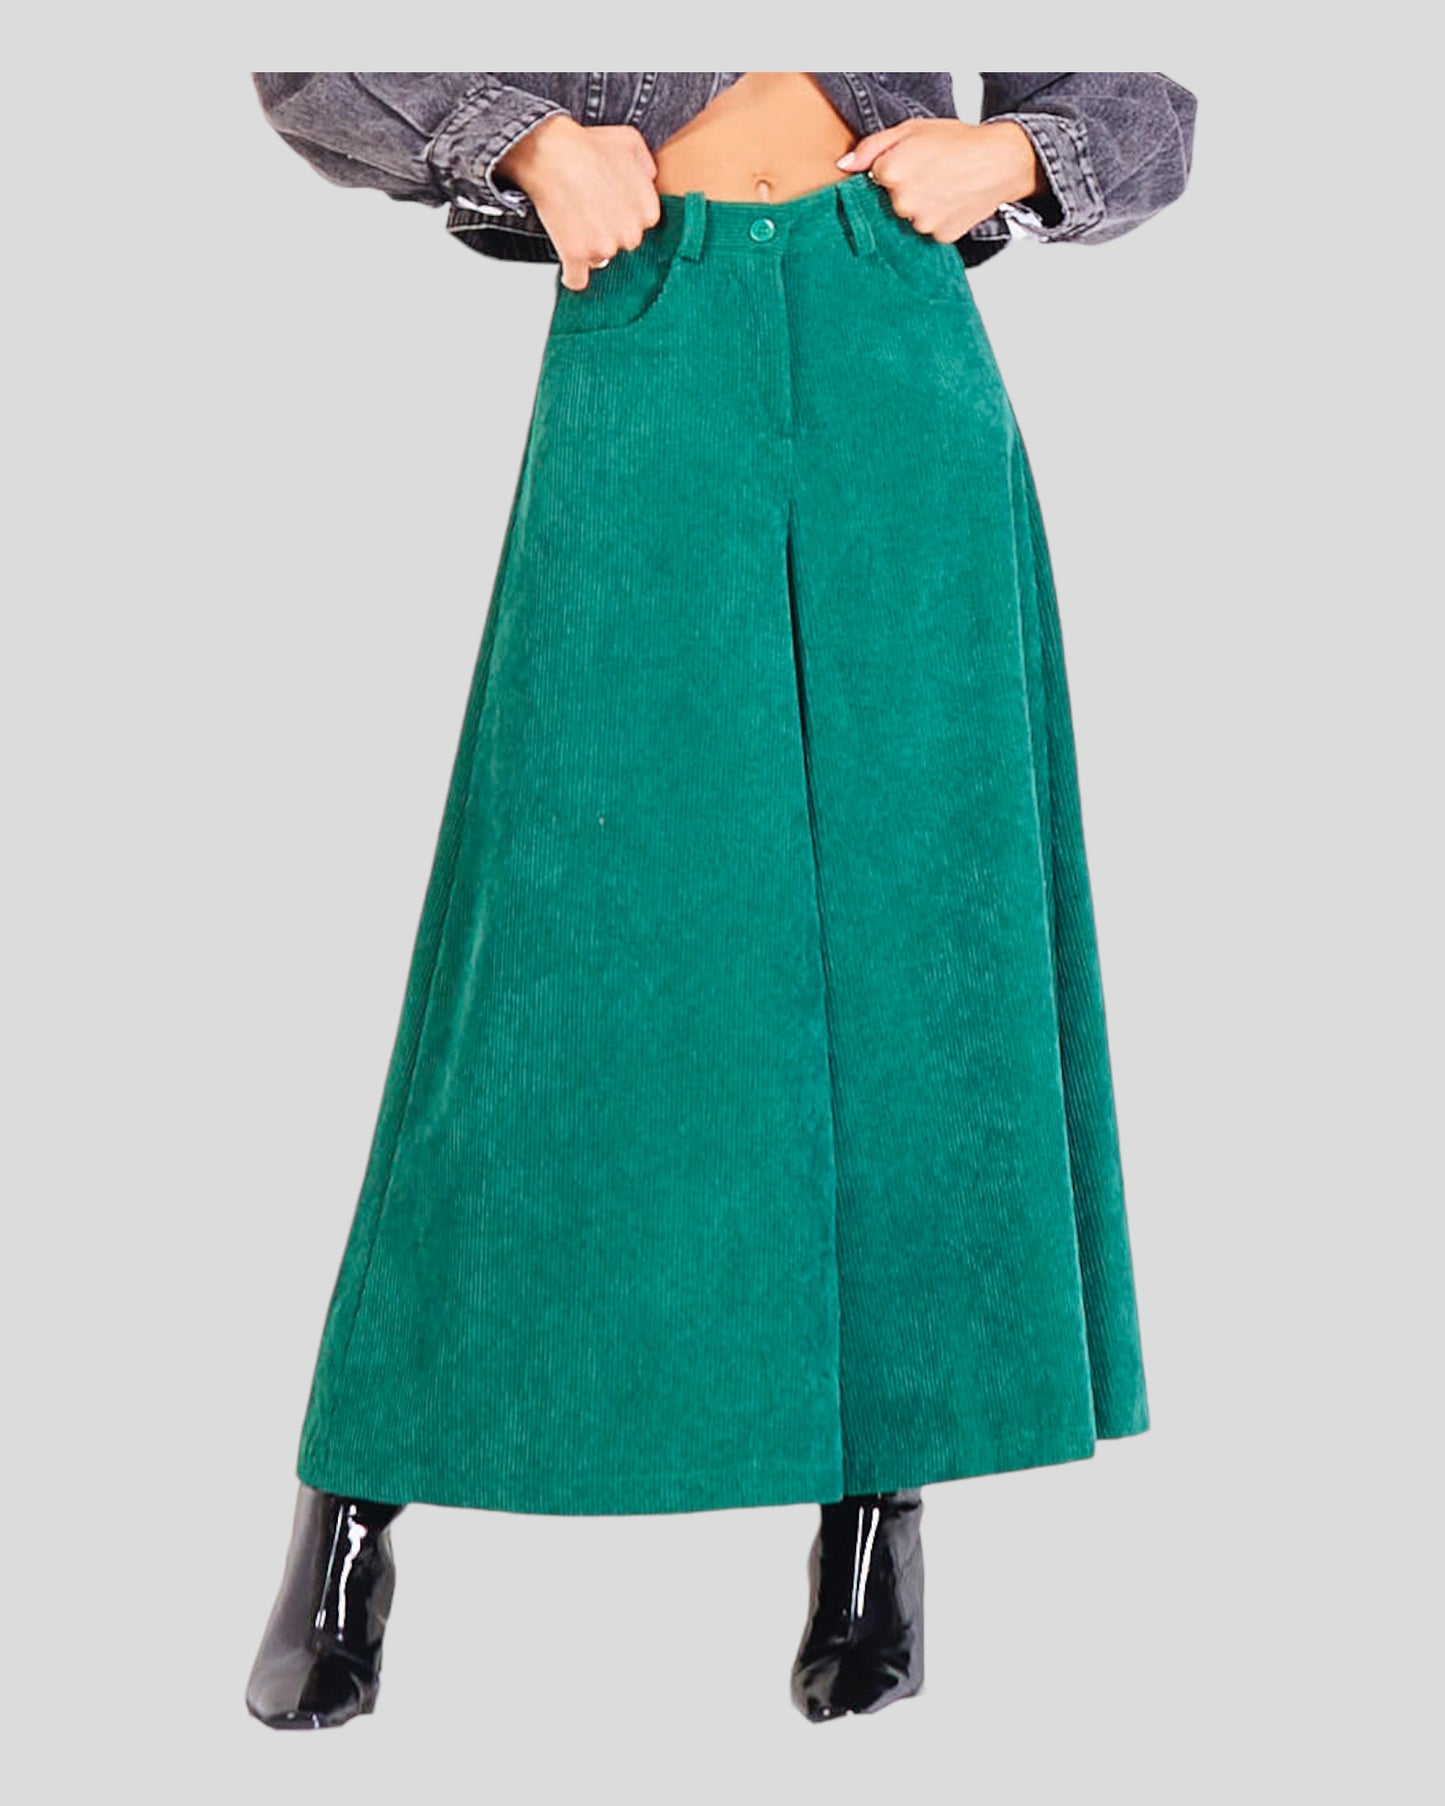 Slightly Short Wide-Leg Trousers in luxurious corduroy velvet, striking a perfect balance between elegance and modern style. The trousers feature a zipper, front closure button, and convenient pockets for both style and functionality. Crafted to be slightly short, these trousers offer a contemporary statement.